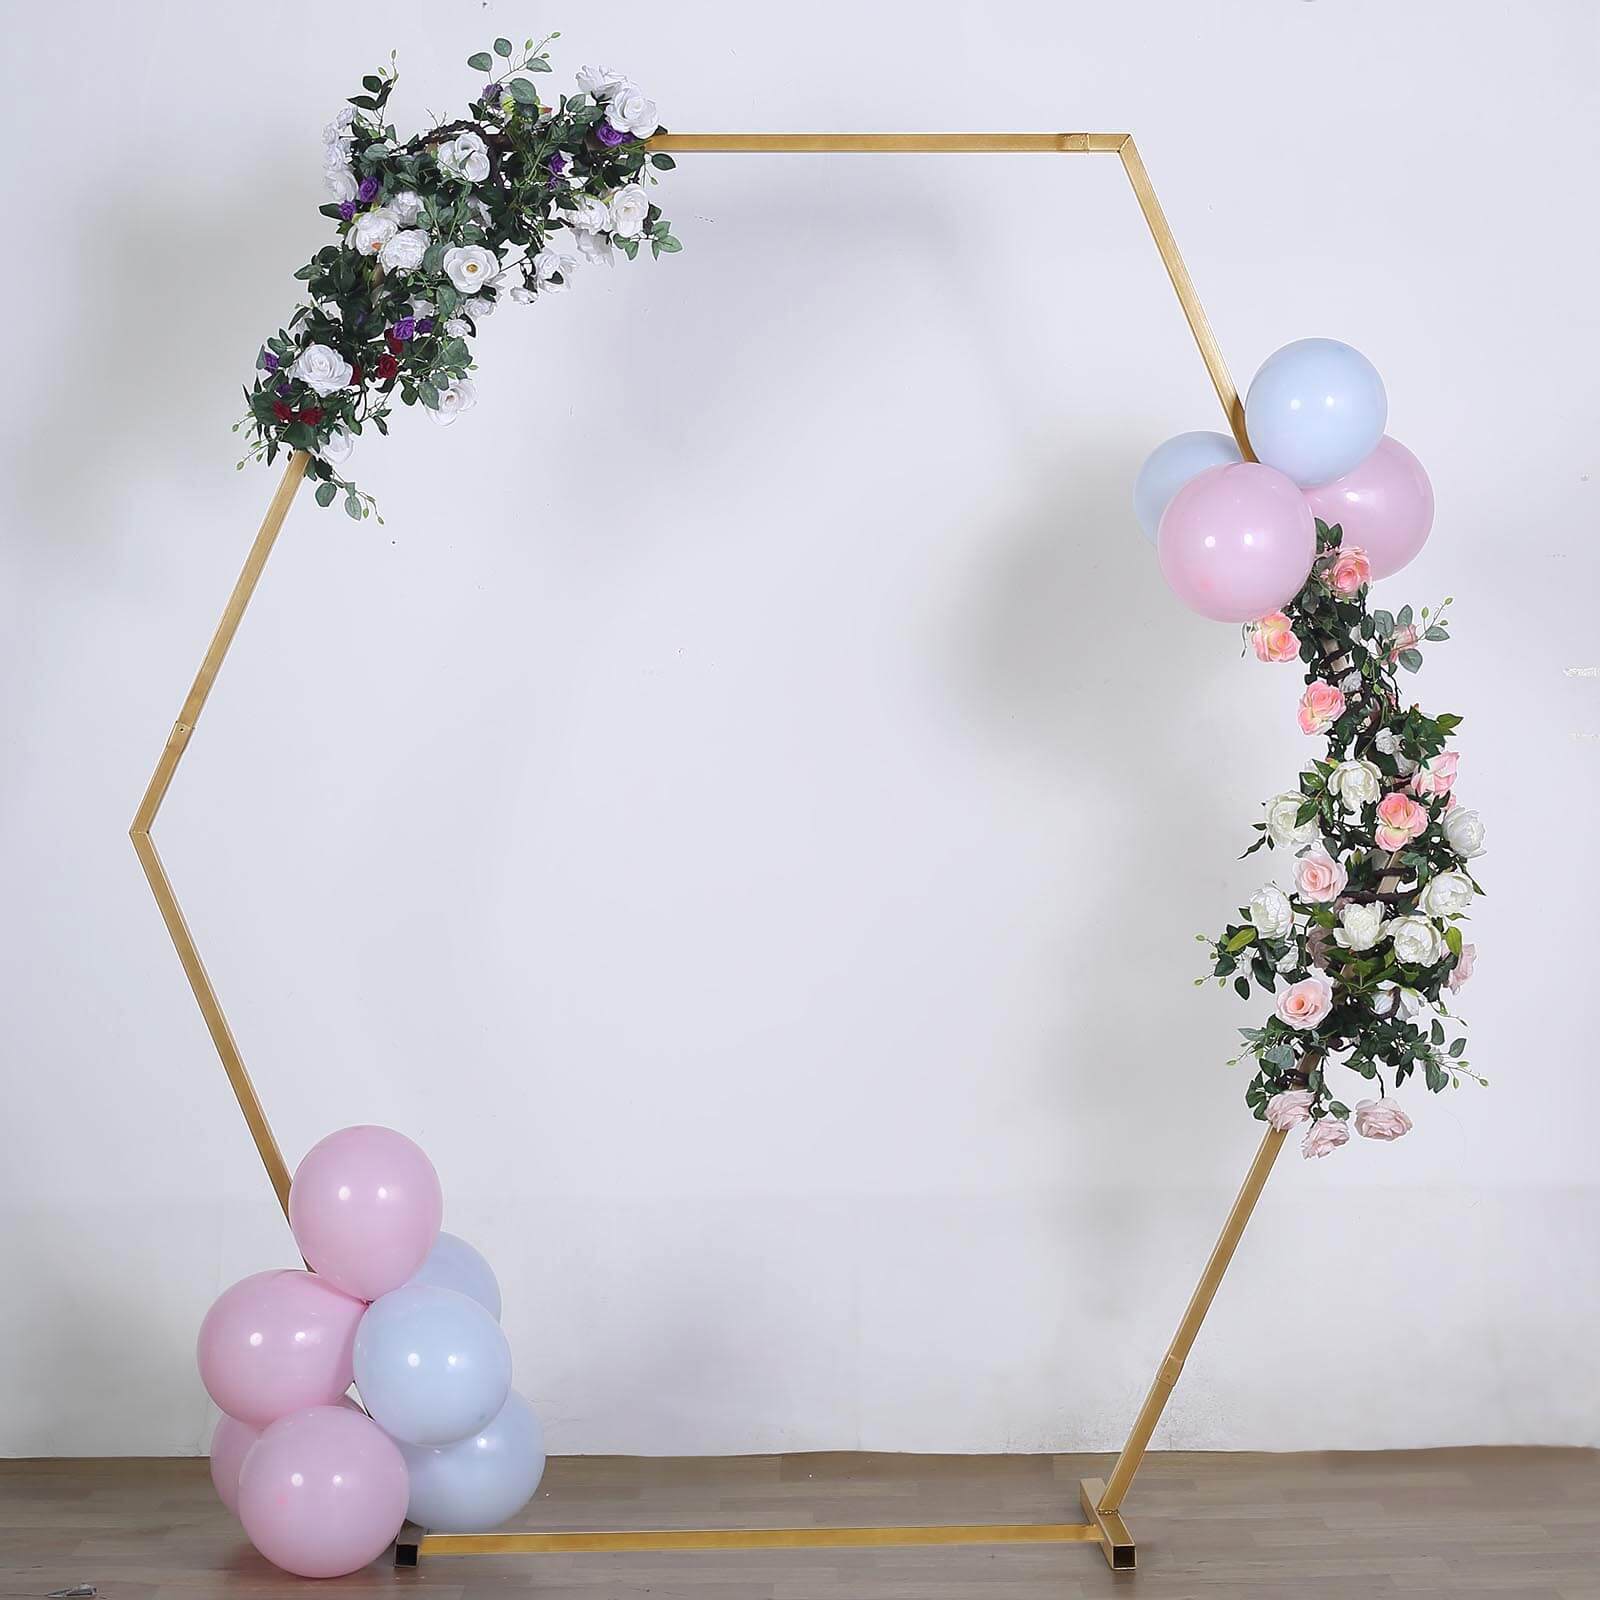 Metal Wedding Arch, Photo Booth Backdrop Stand | eFavorMart